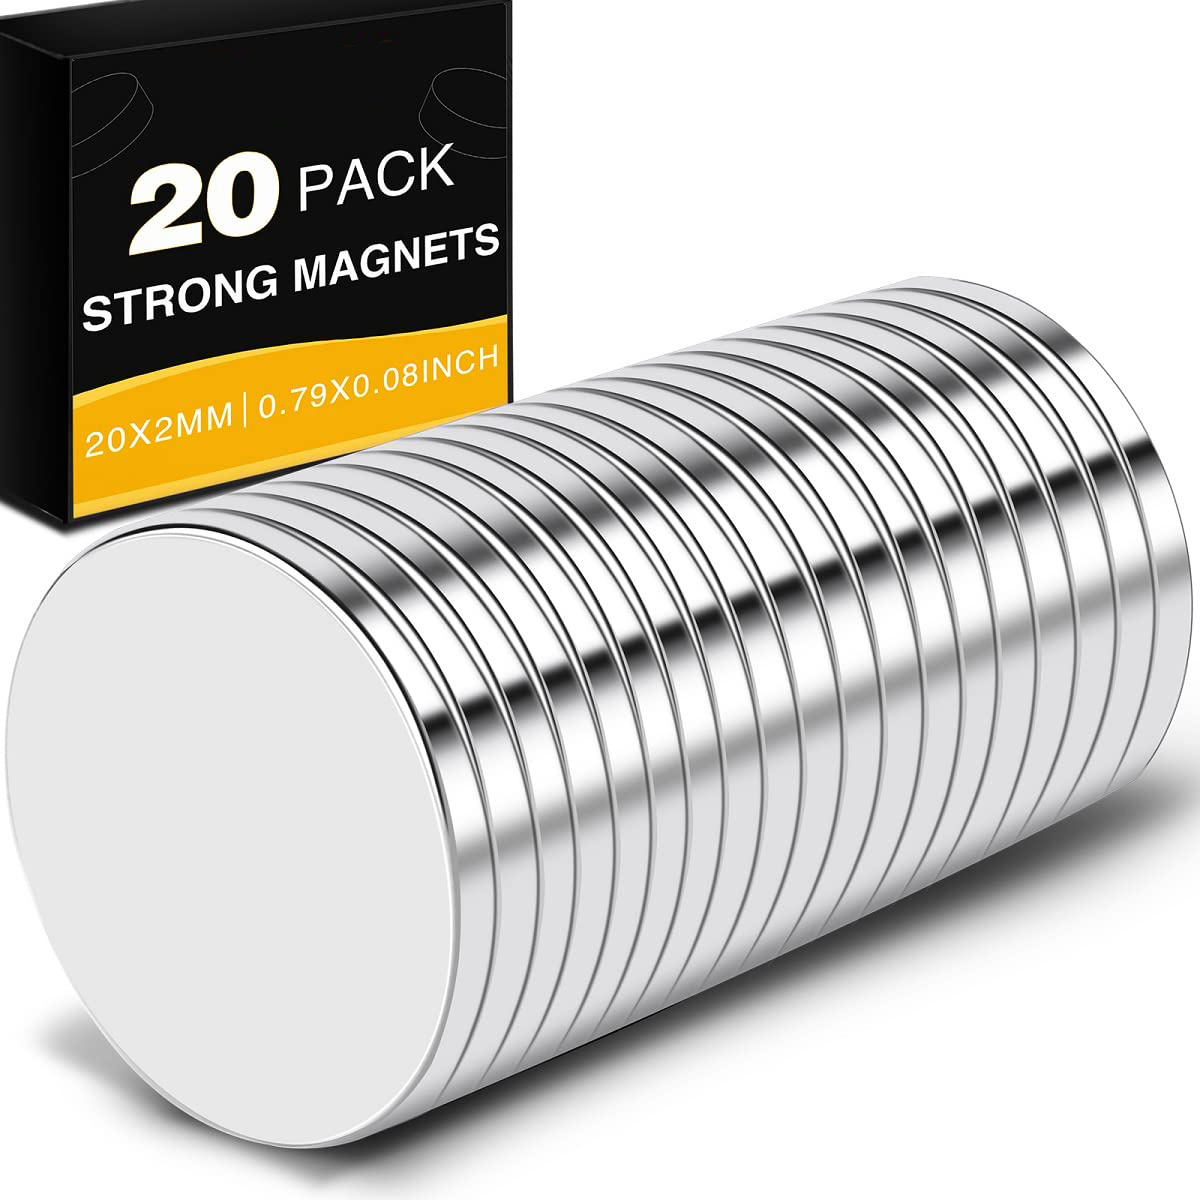 TRYMAG Small Strong Magnets, Rare Earth Magnets, 3 Size 75pcs, Small  Neodymium Magnets Black Fridge Magnets for Whiteboard, Billboard, Hobbies